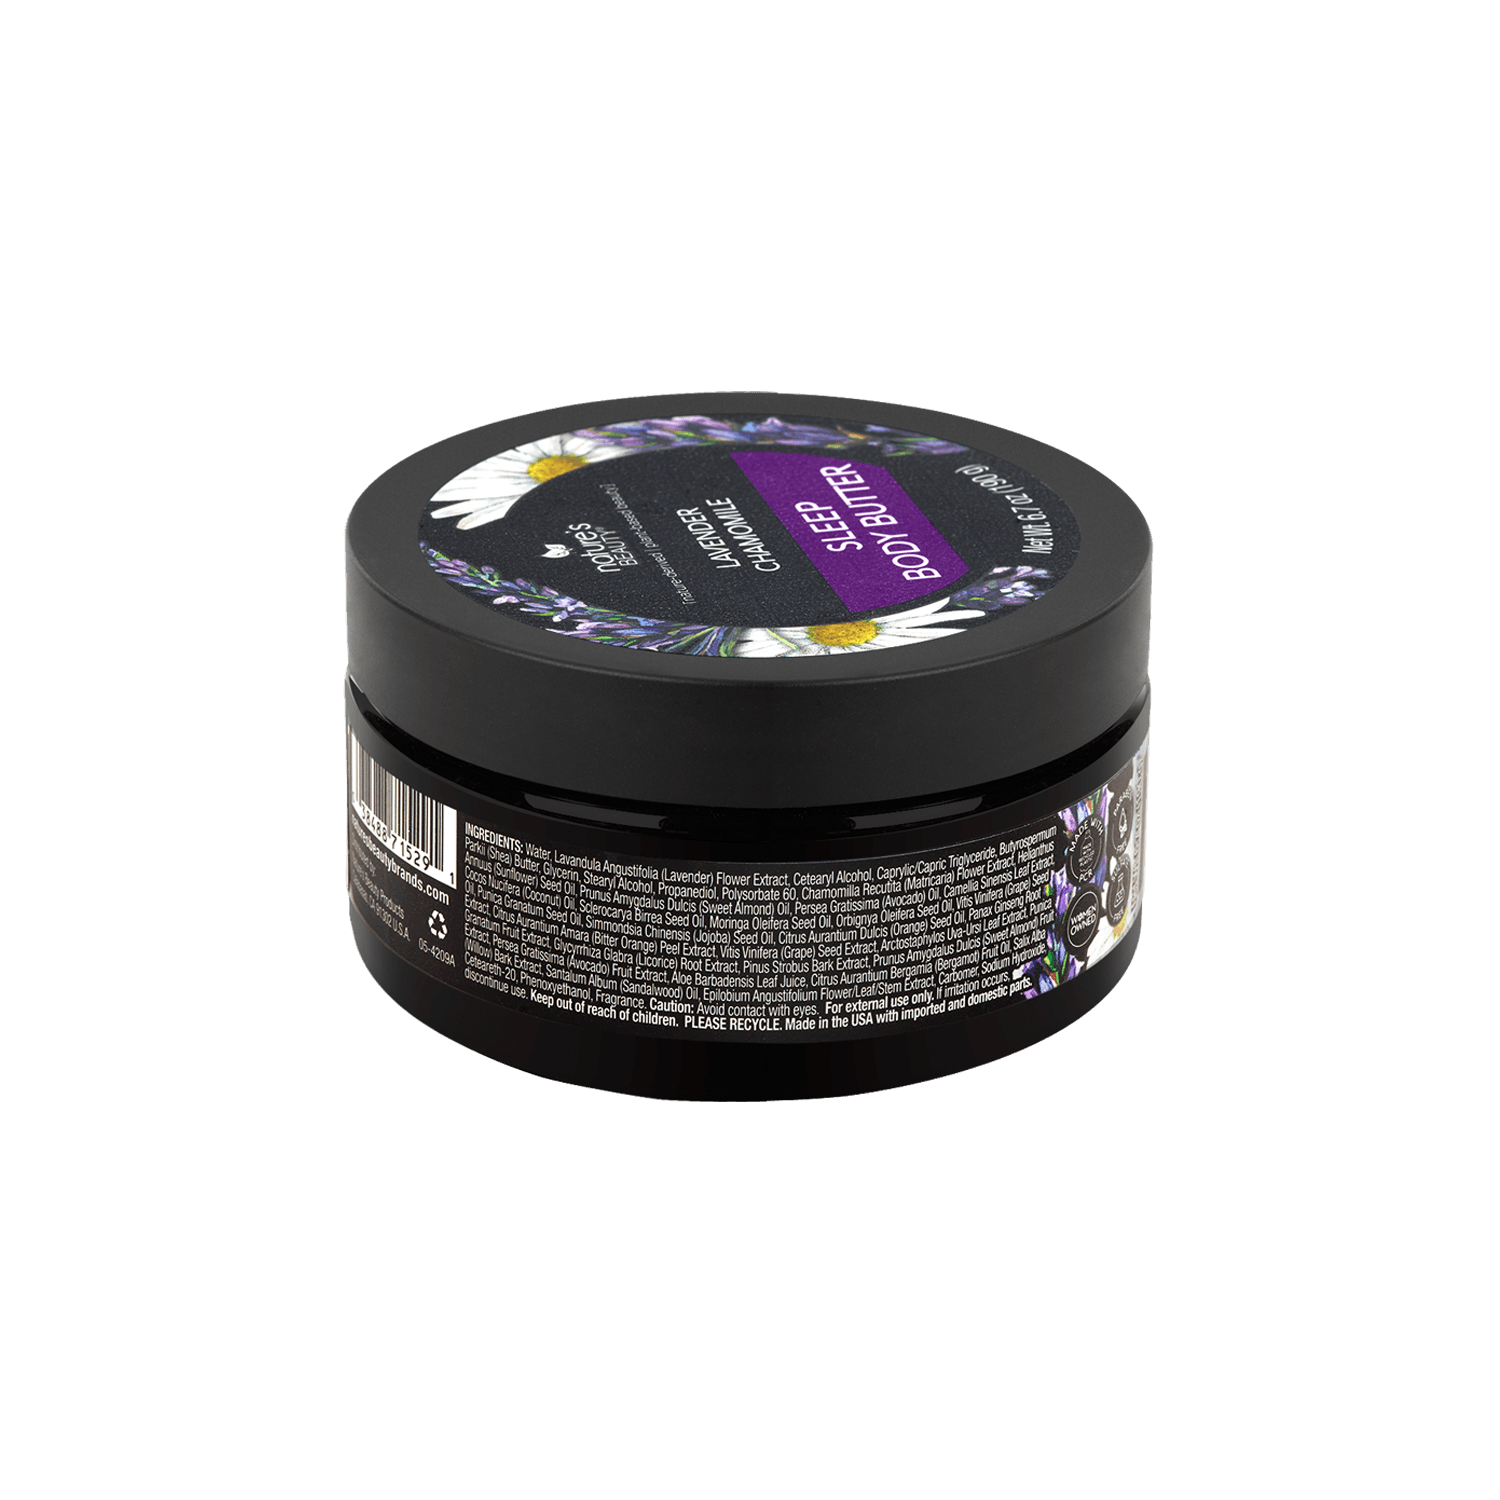 Lavender Chamomile Sleep Body Butter Nature's Beauty Body Care 